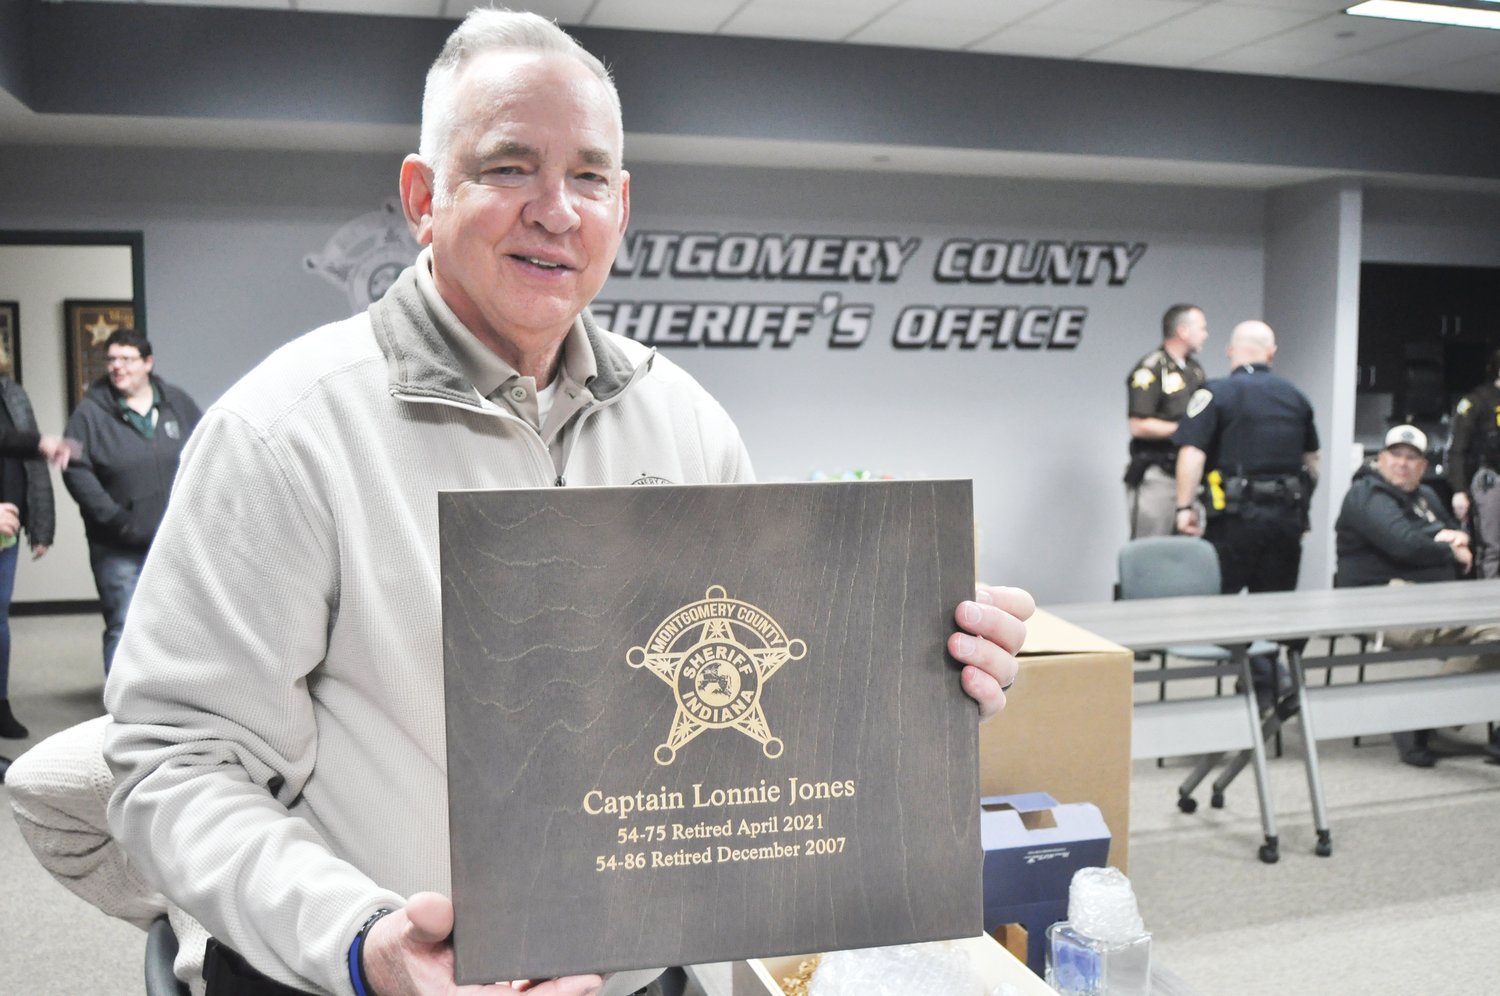 Capt. Lonnie Jones of the Montgomery County Sheriff’s Office holds a plaque commemorating his retirement Wednesday at the Montgomery County Jail. Jones first joined the department in 1988 and had served as jail commander since 2011.